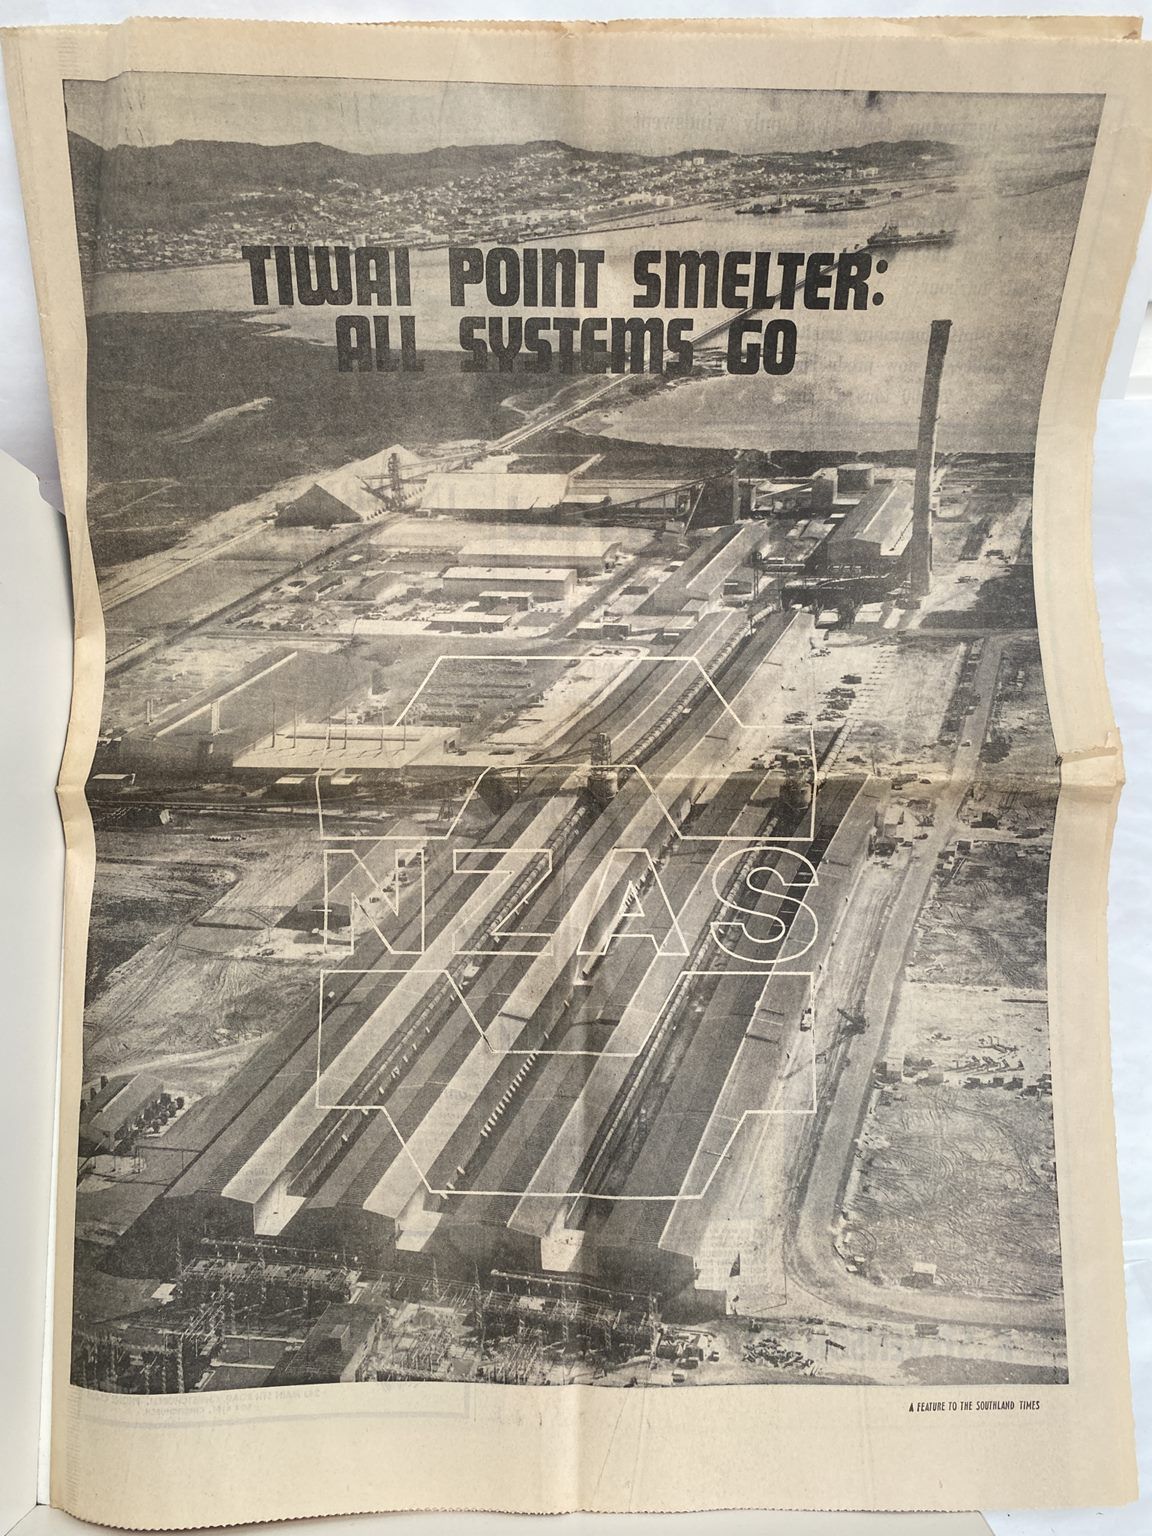 OLD NEWSPAPER: The Southland Times 1971 - Tiwai Point Smelter Opening